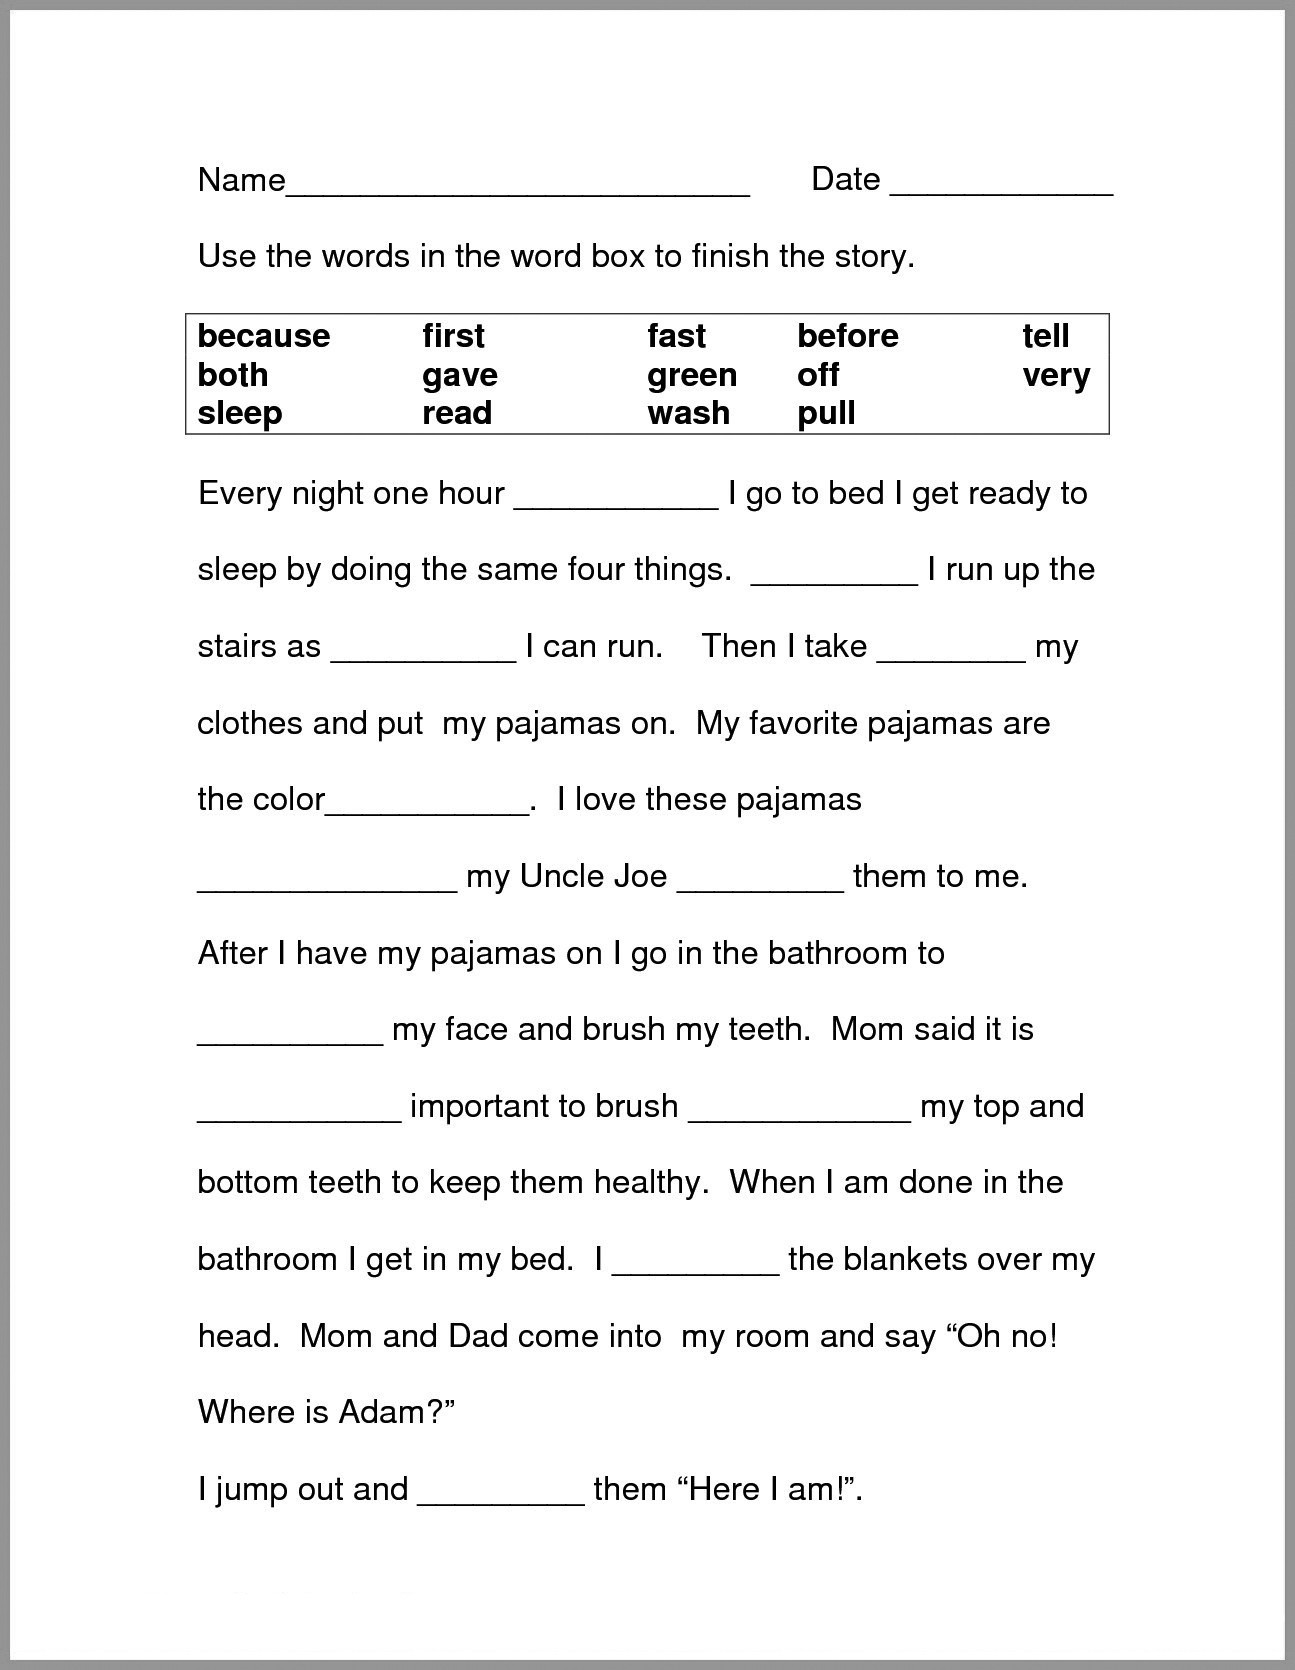 20nd Grade English Worksheets - Best Coloring Pages For Kids For 2nd Grade Vocabulary Worksheet